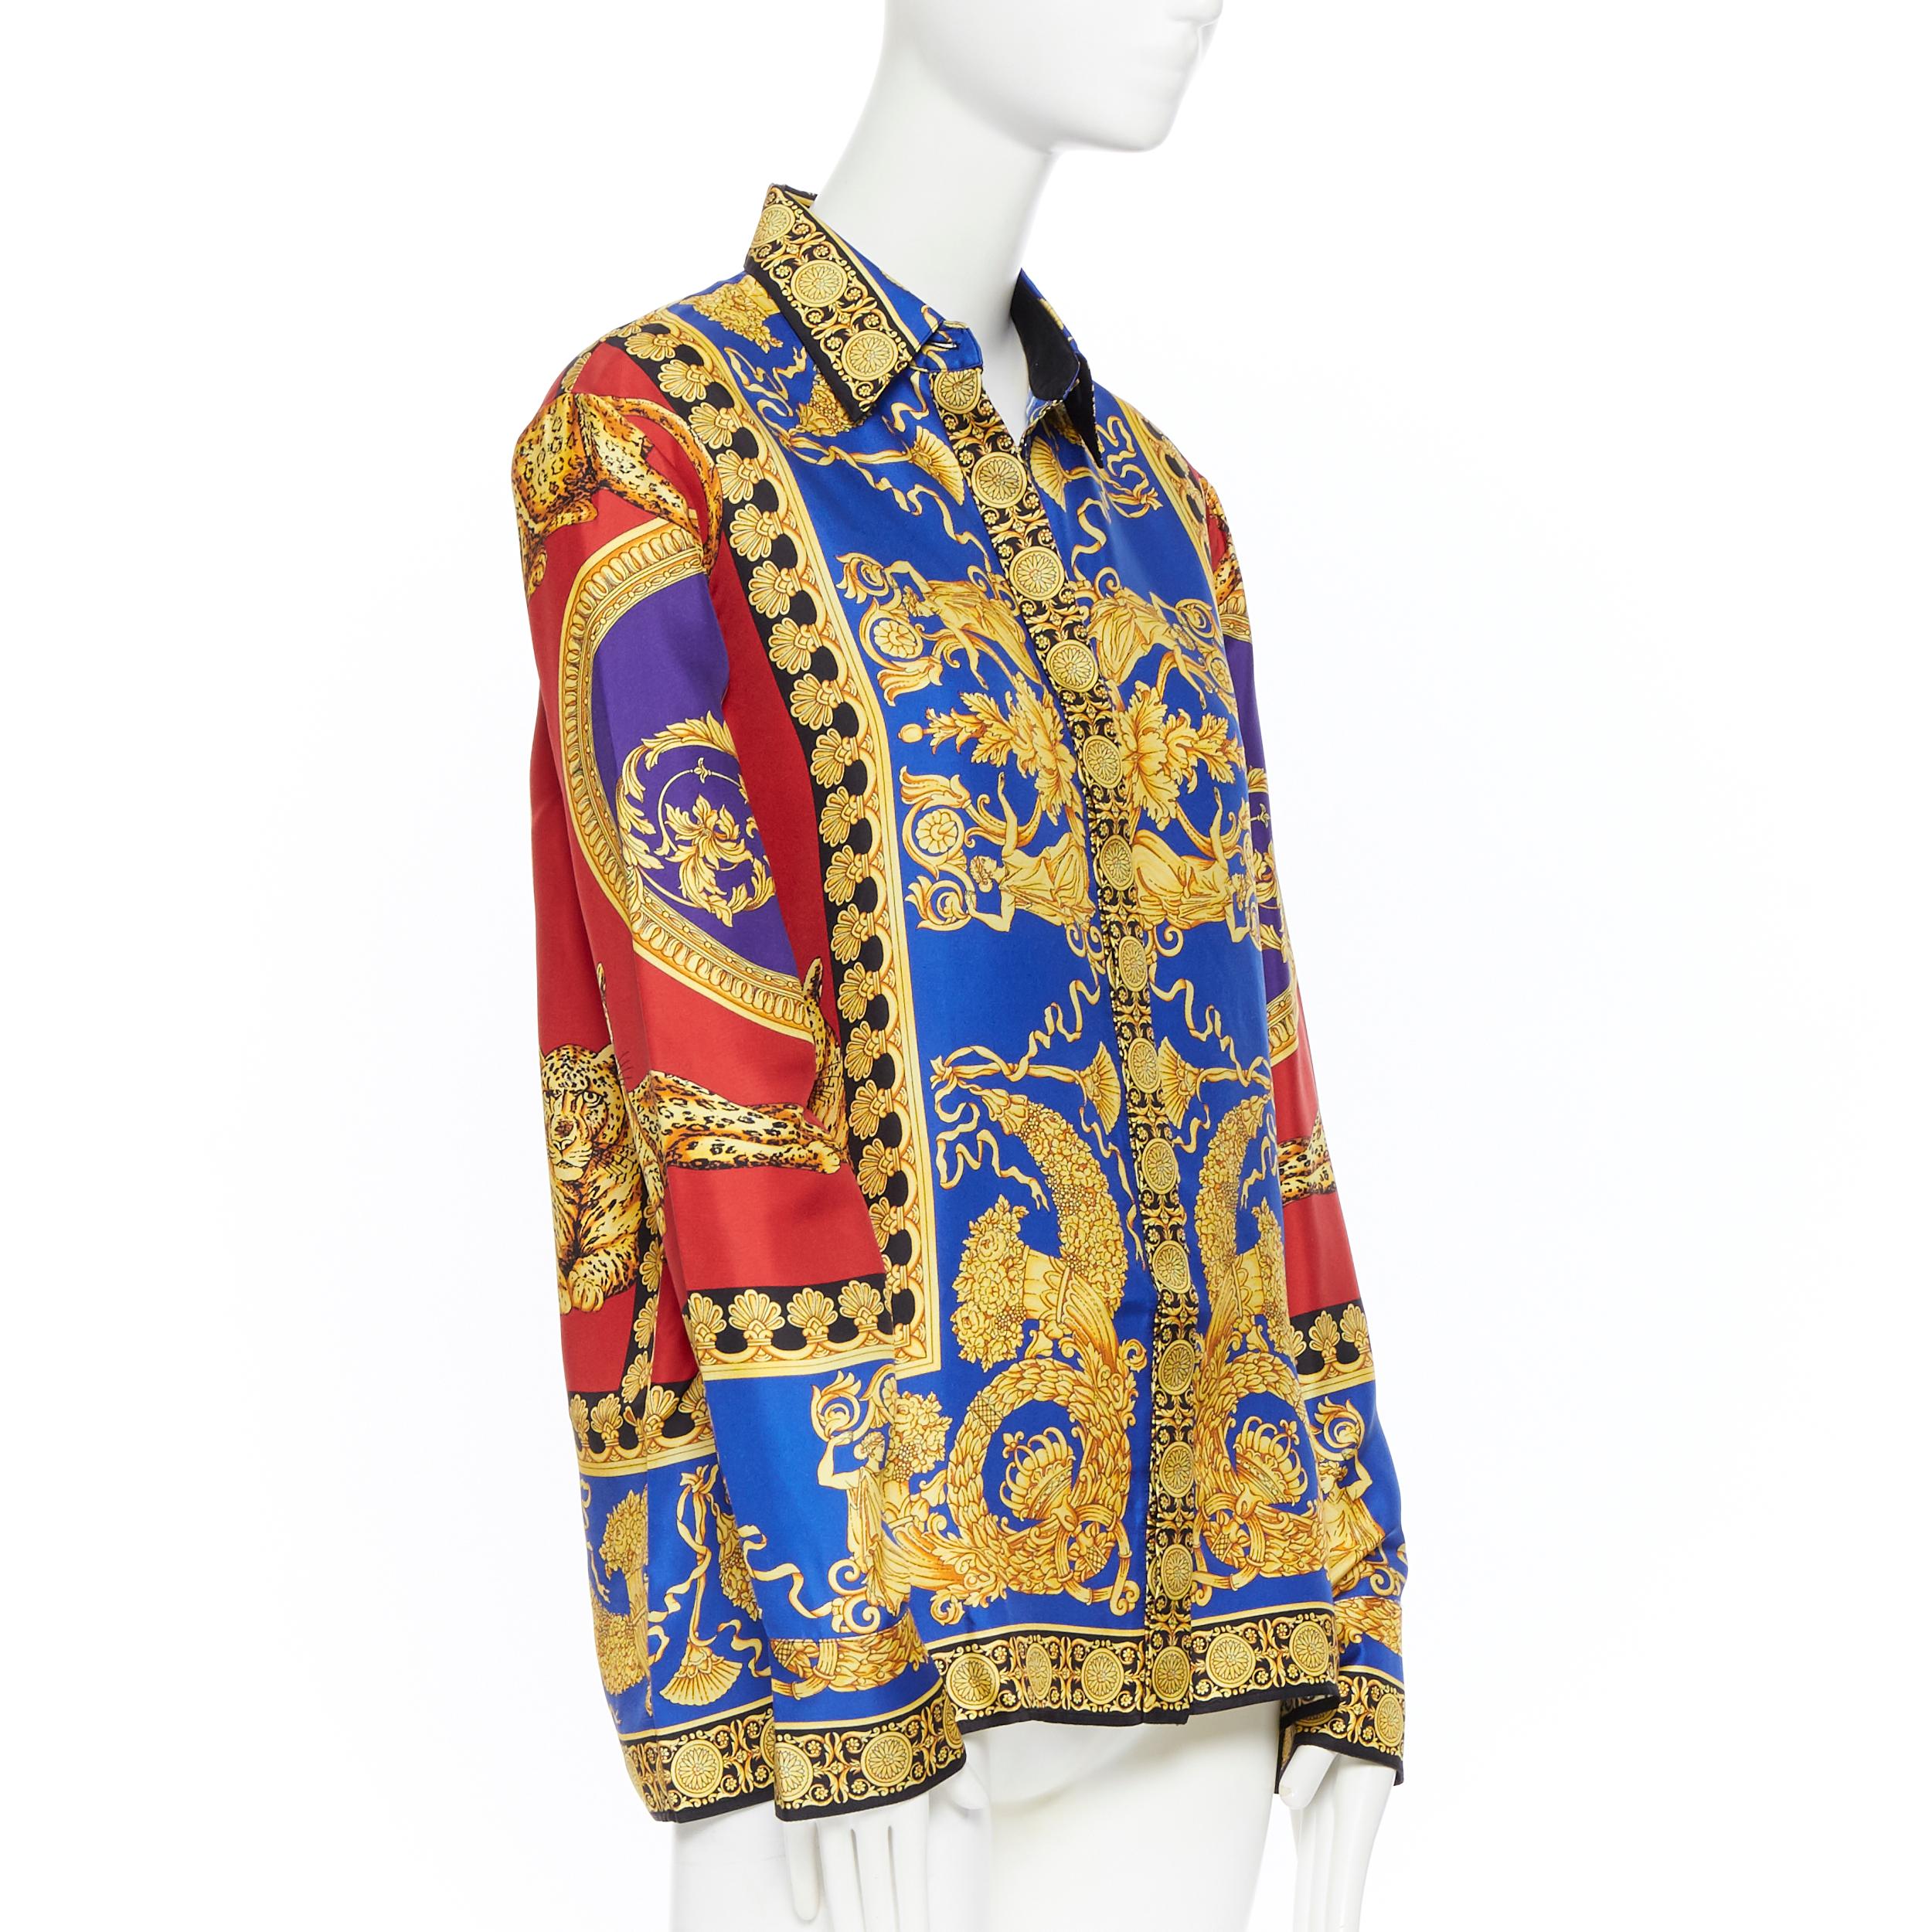 new VERSACE 2018 Runway 100% silk blue red gold Leopard baroque royal shirt IT44
Brand: Versace
Designer: Donatella Versace
Collection: Pre Fall 2018 Look 23
Model Name / Style: Silk shirt
Material: Silk
Color: Multicolour
Pattern: Other; baroque